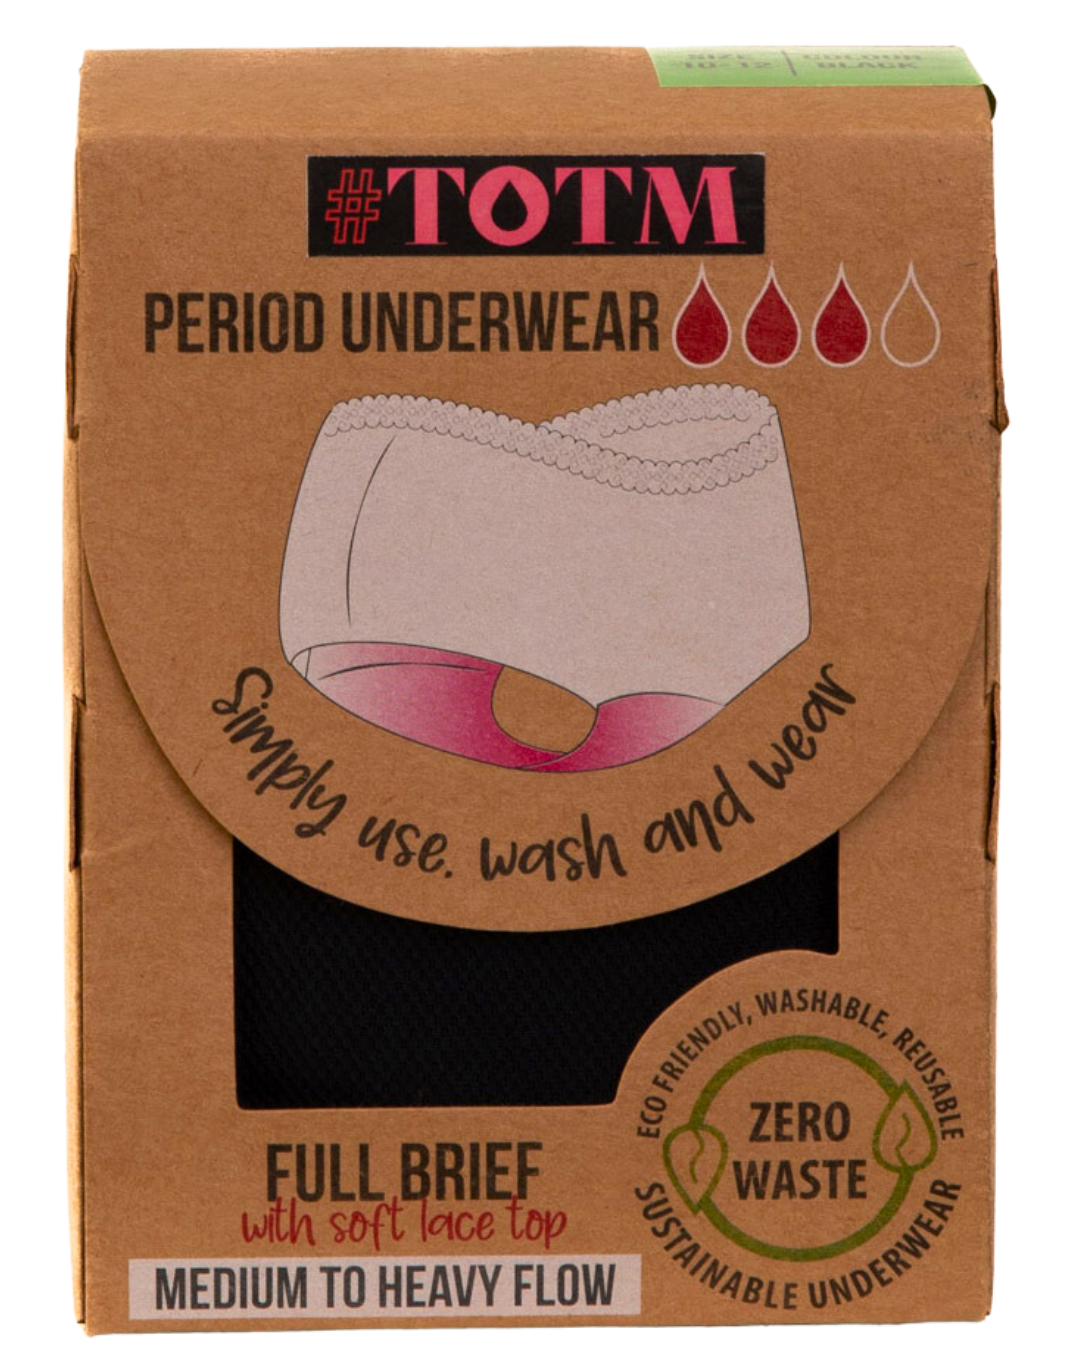 TOTM Full Brief Style Period Pant